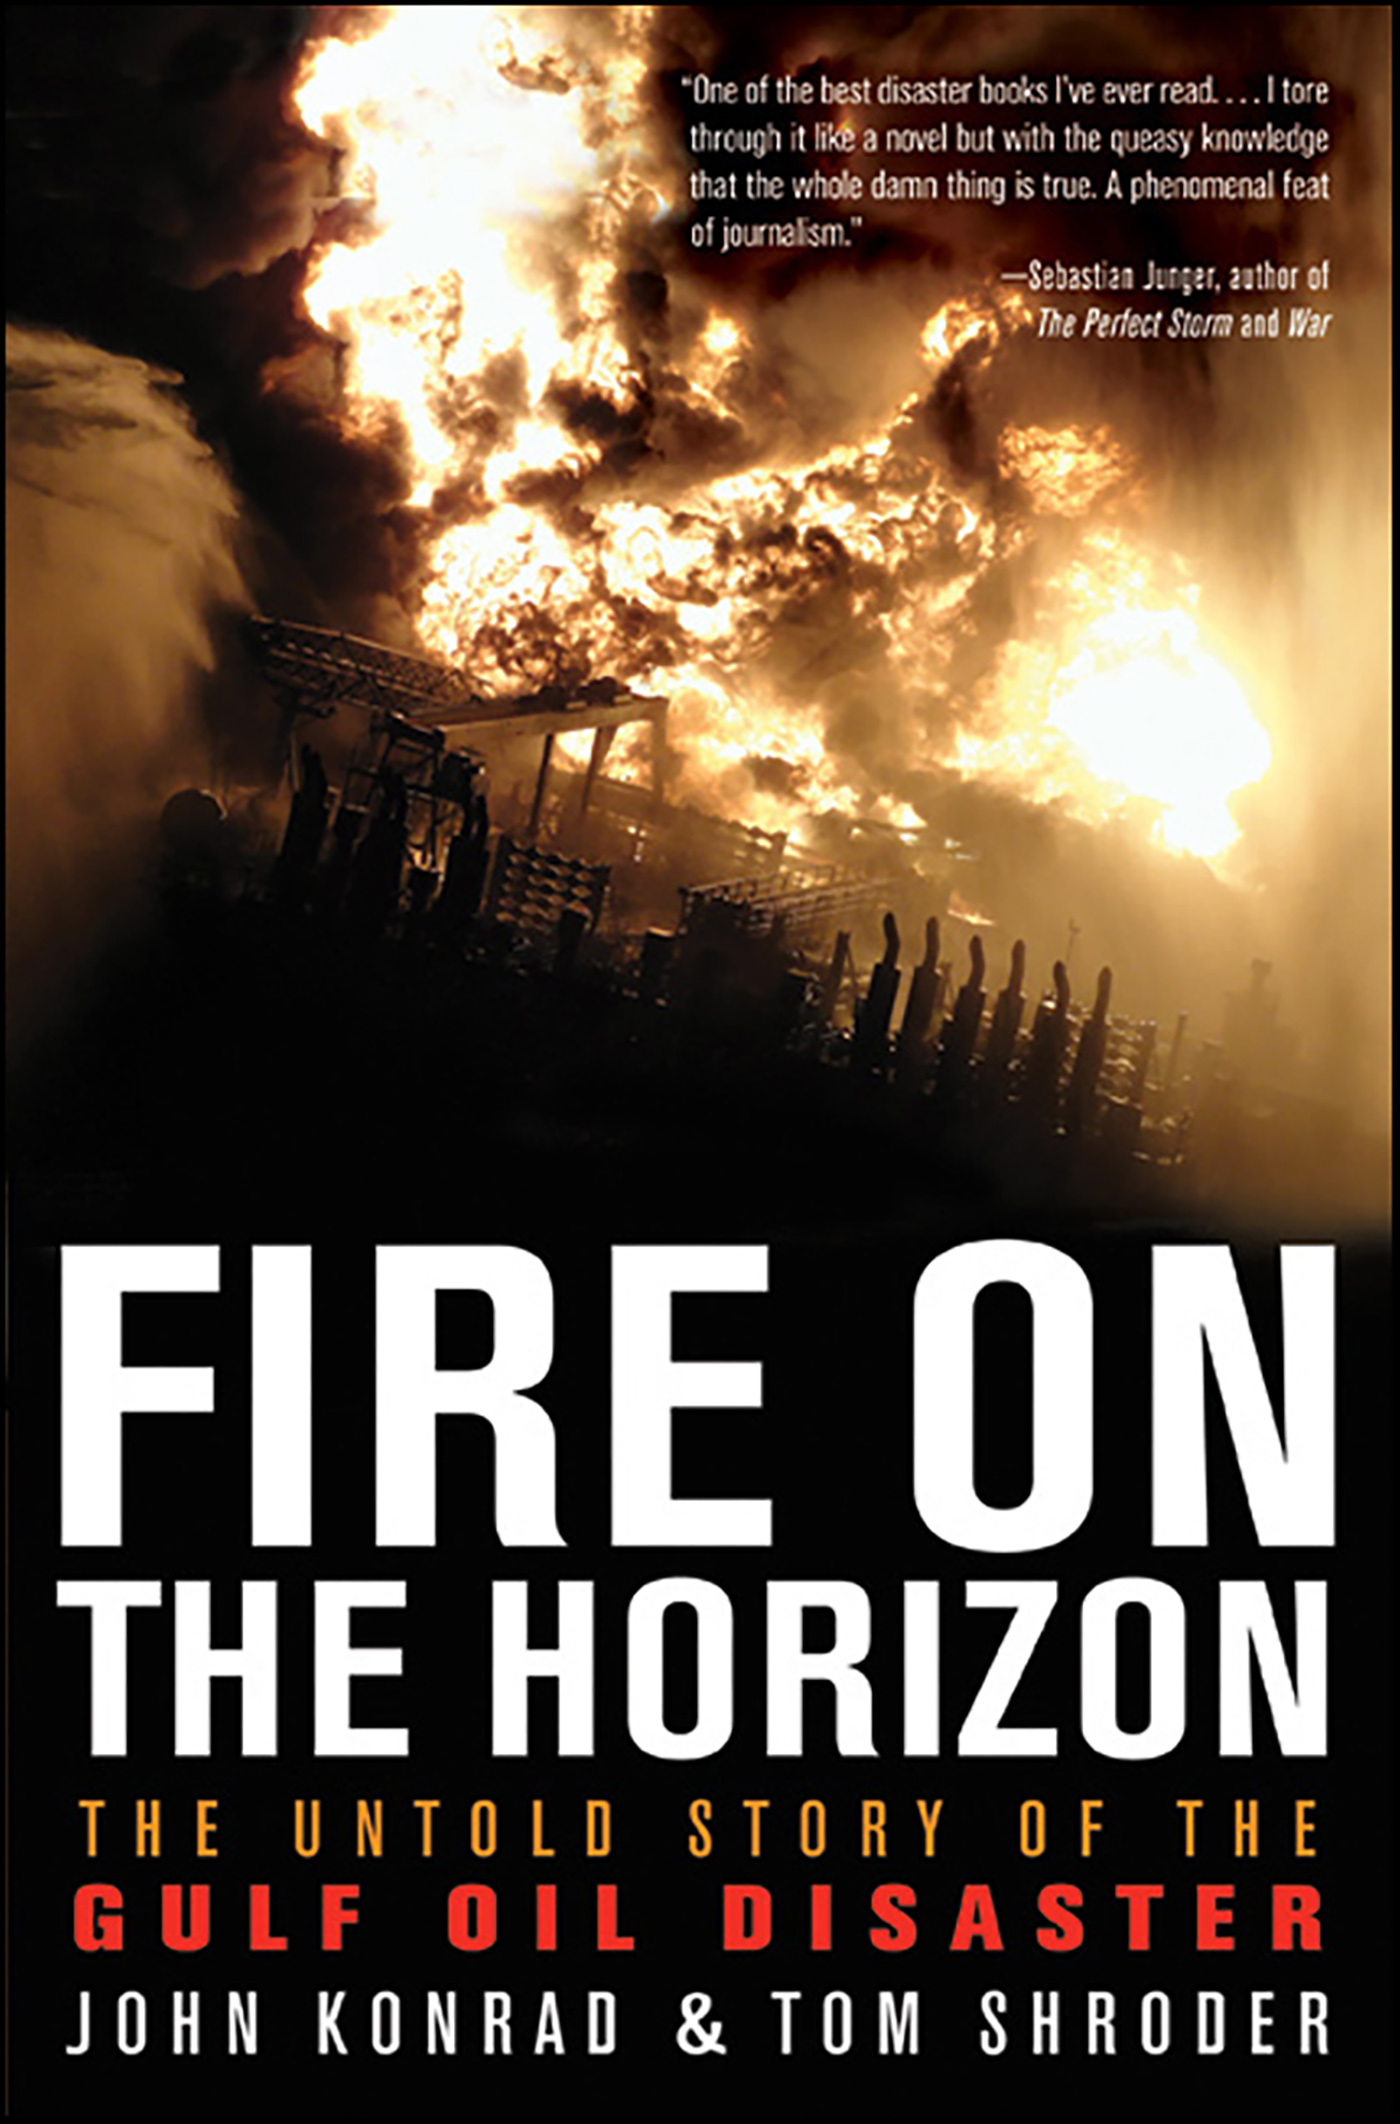 Fire on the horizon cover image